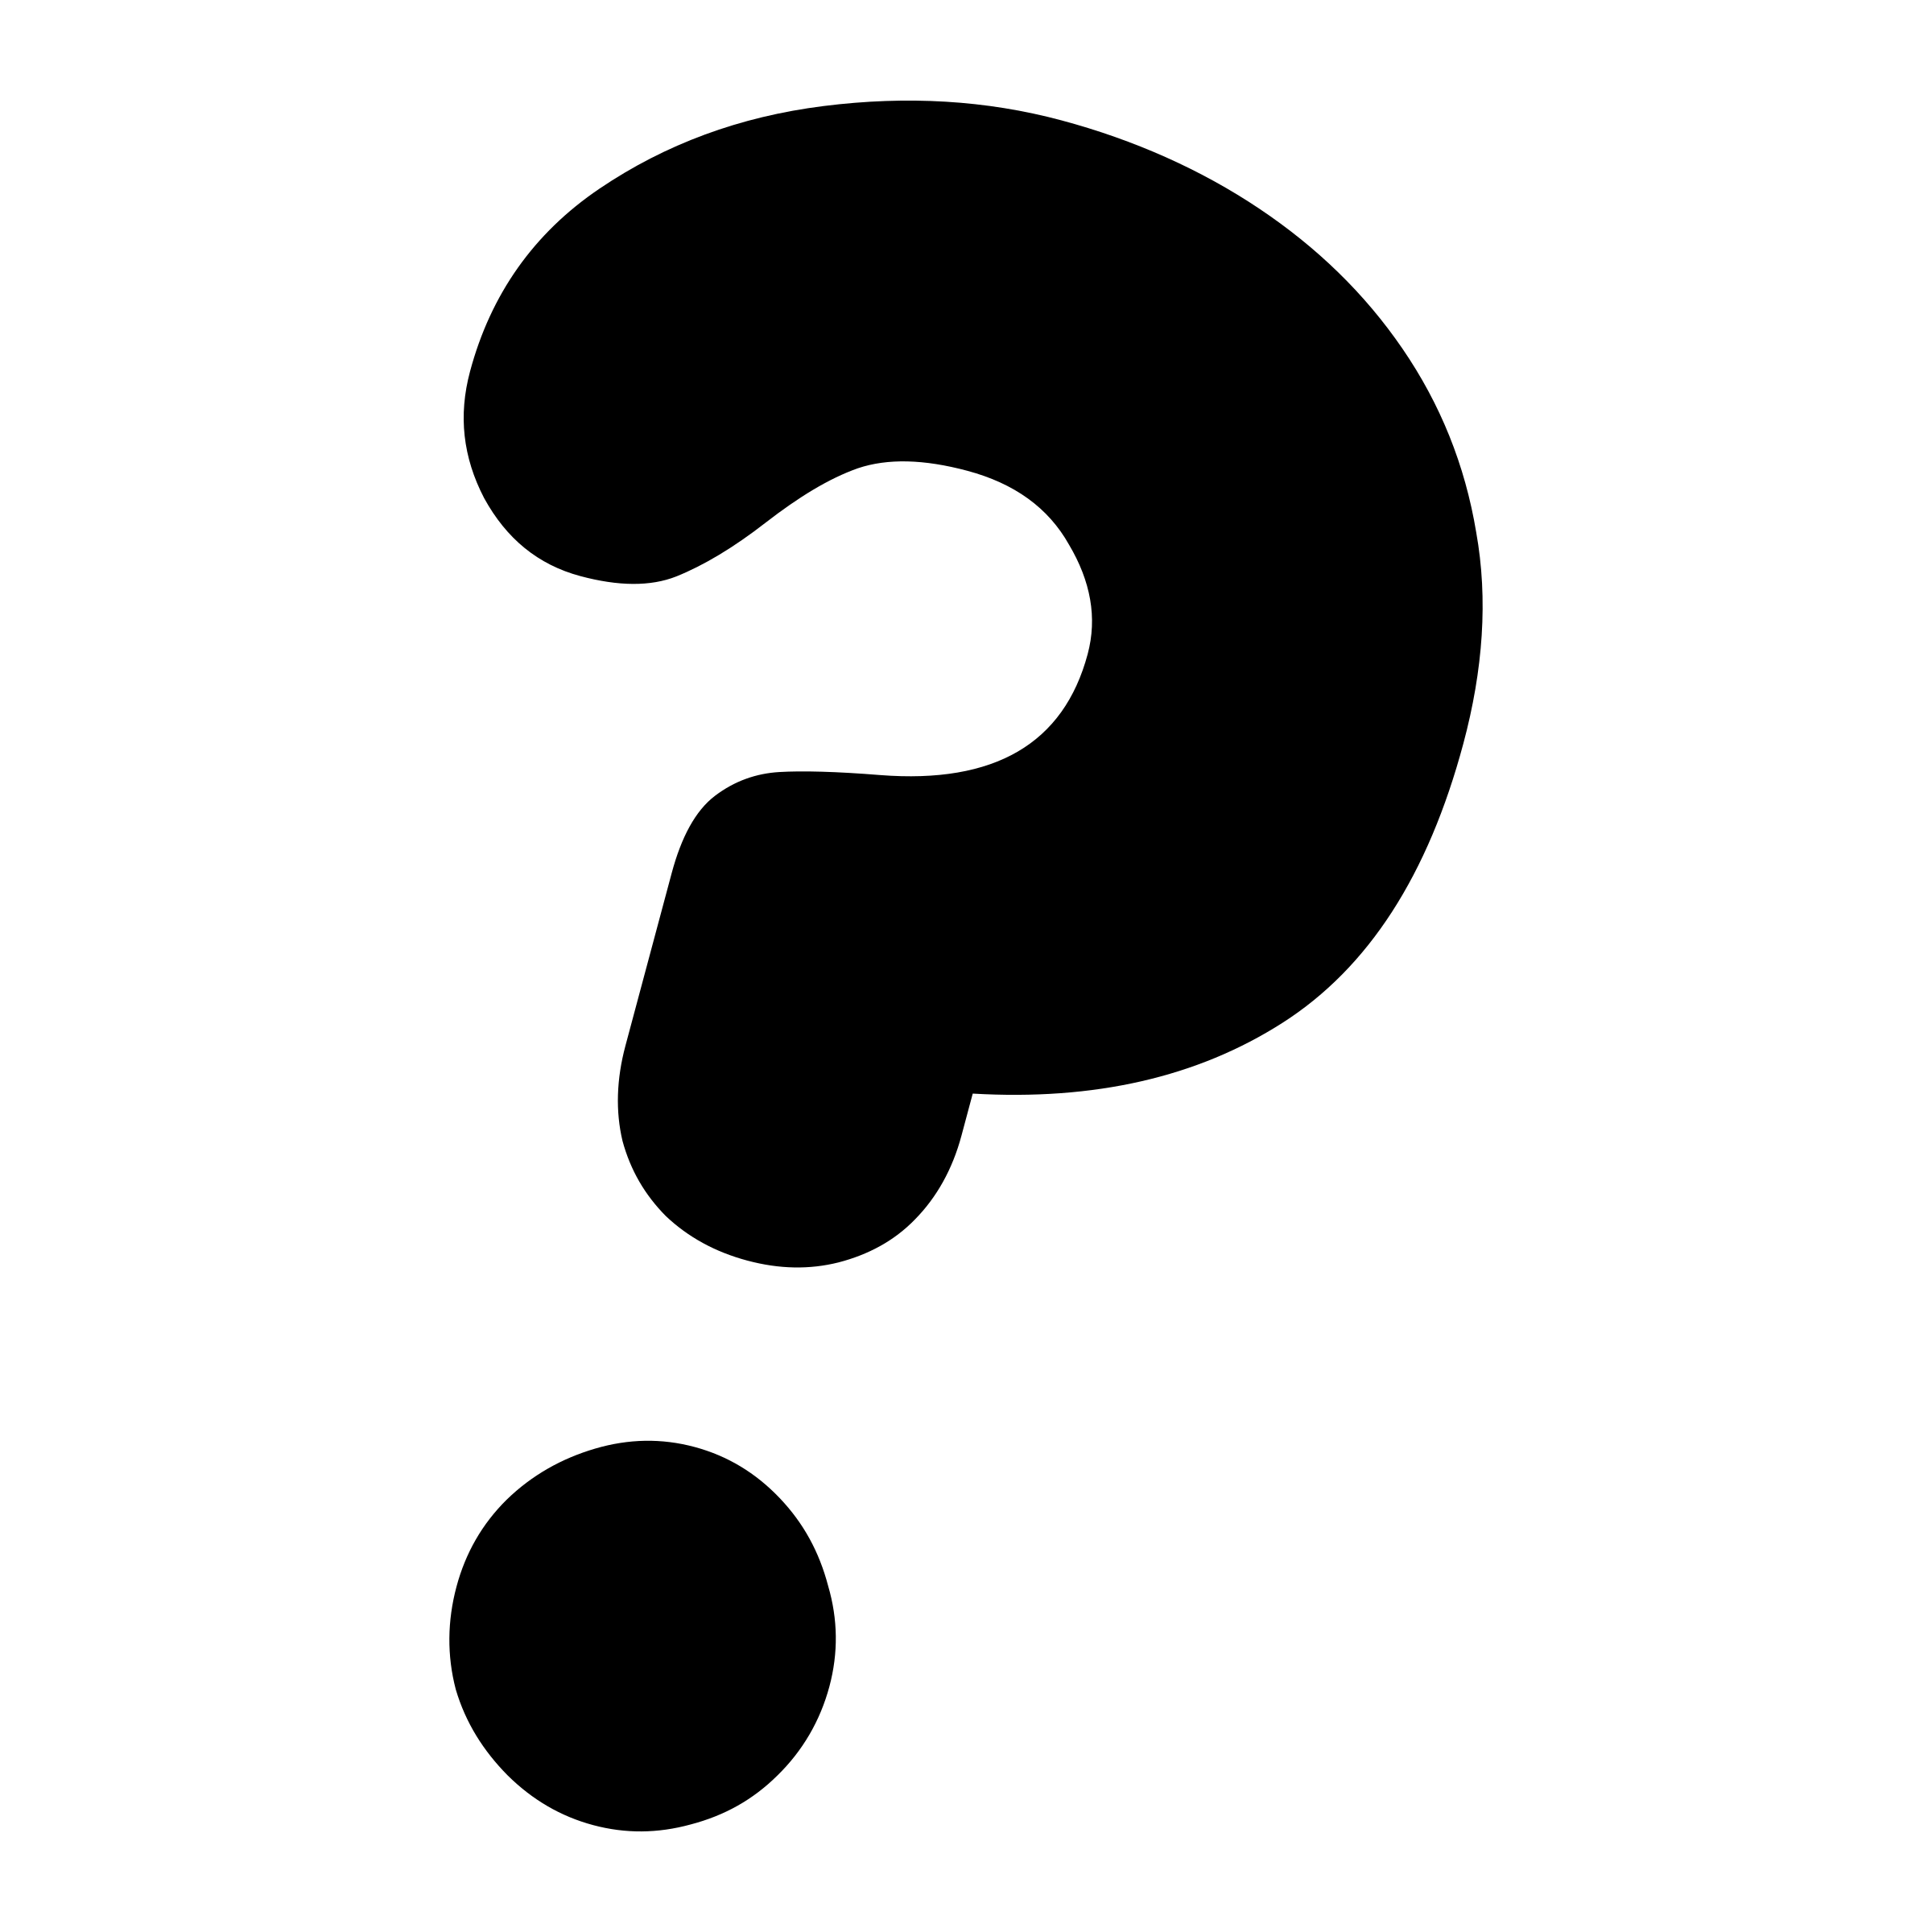 question mark clipart no background - photo #36